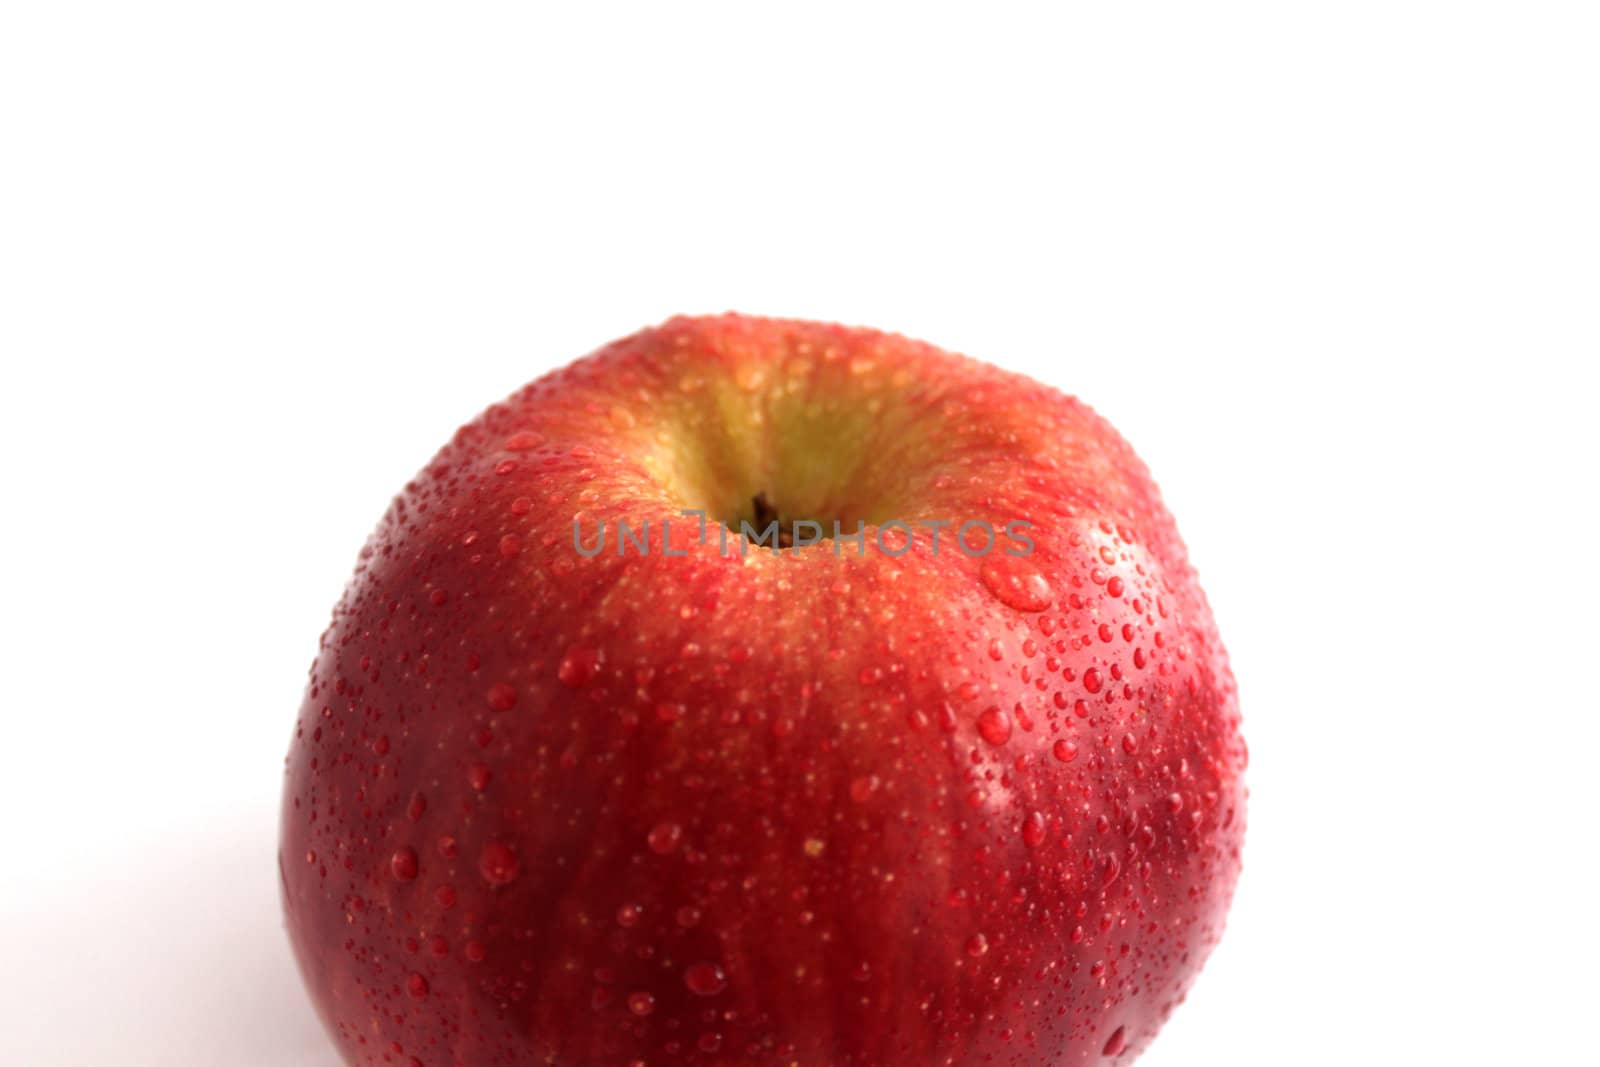 wet red apple isolated on white background